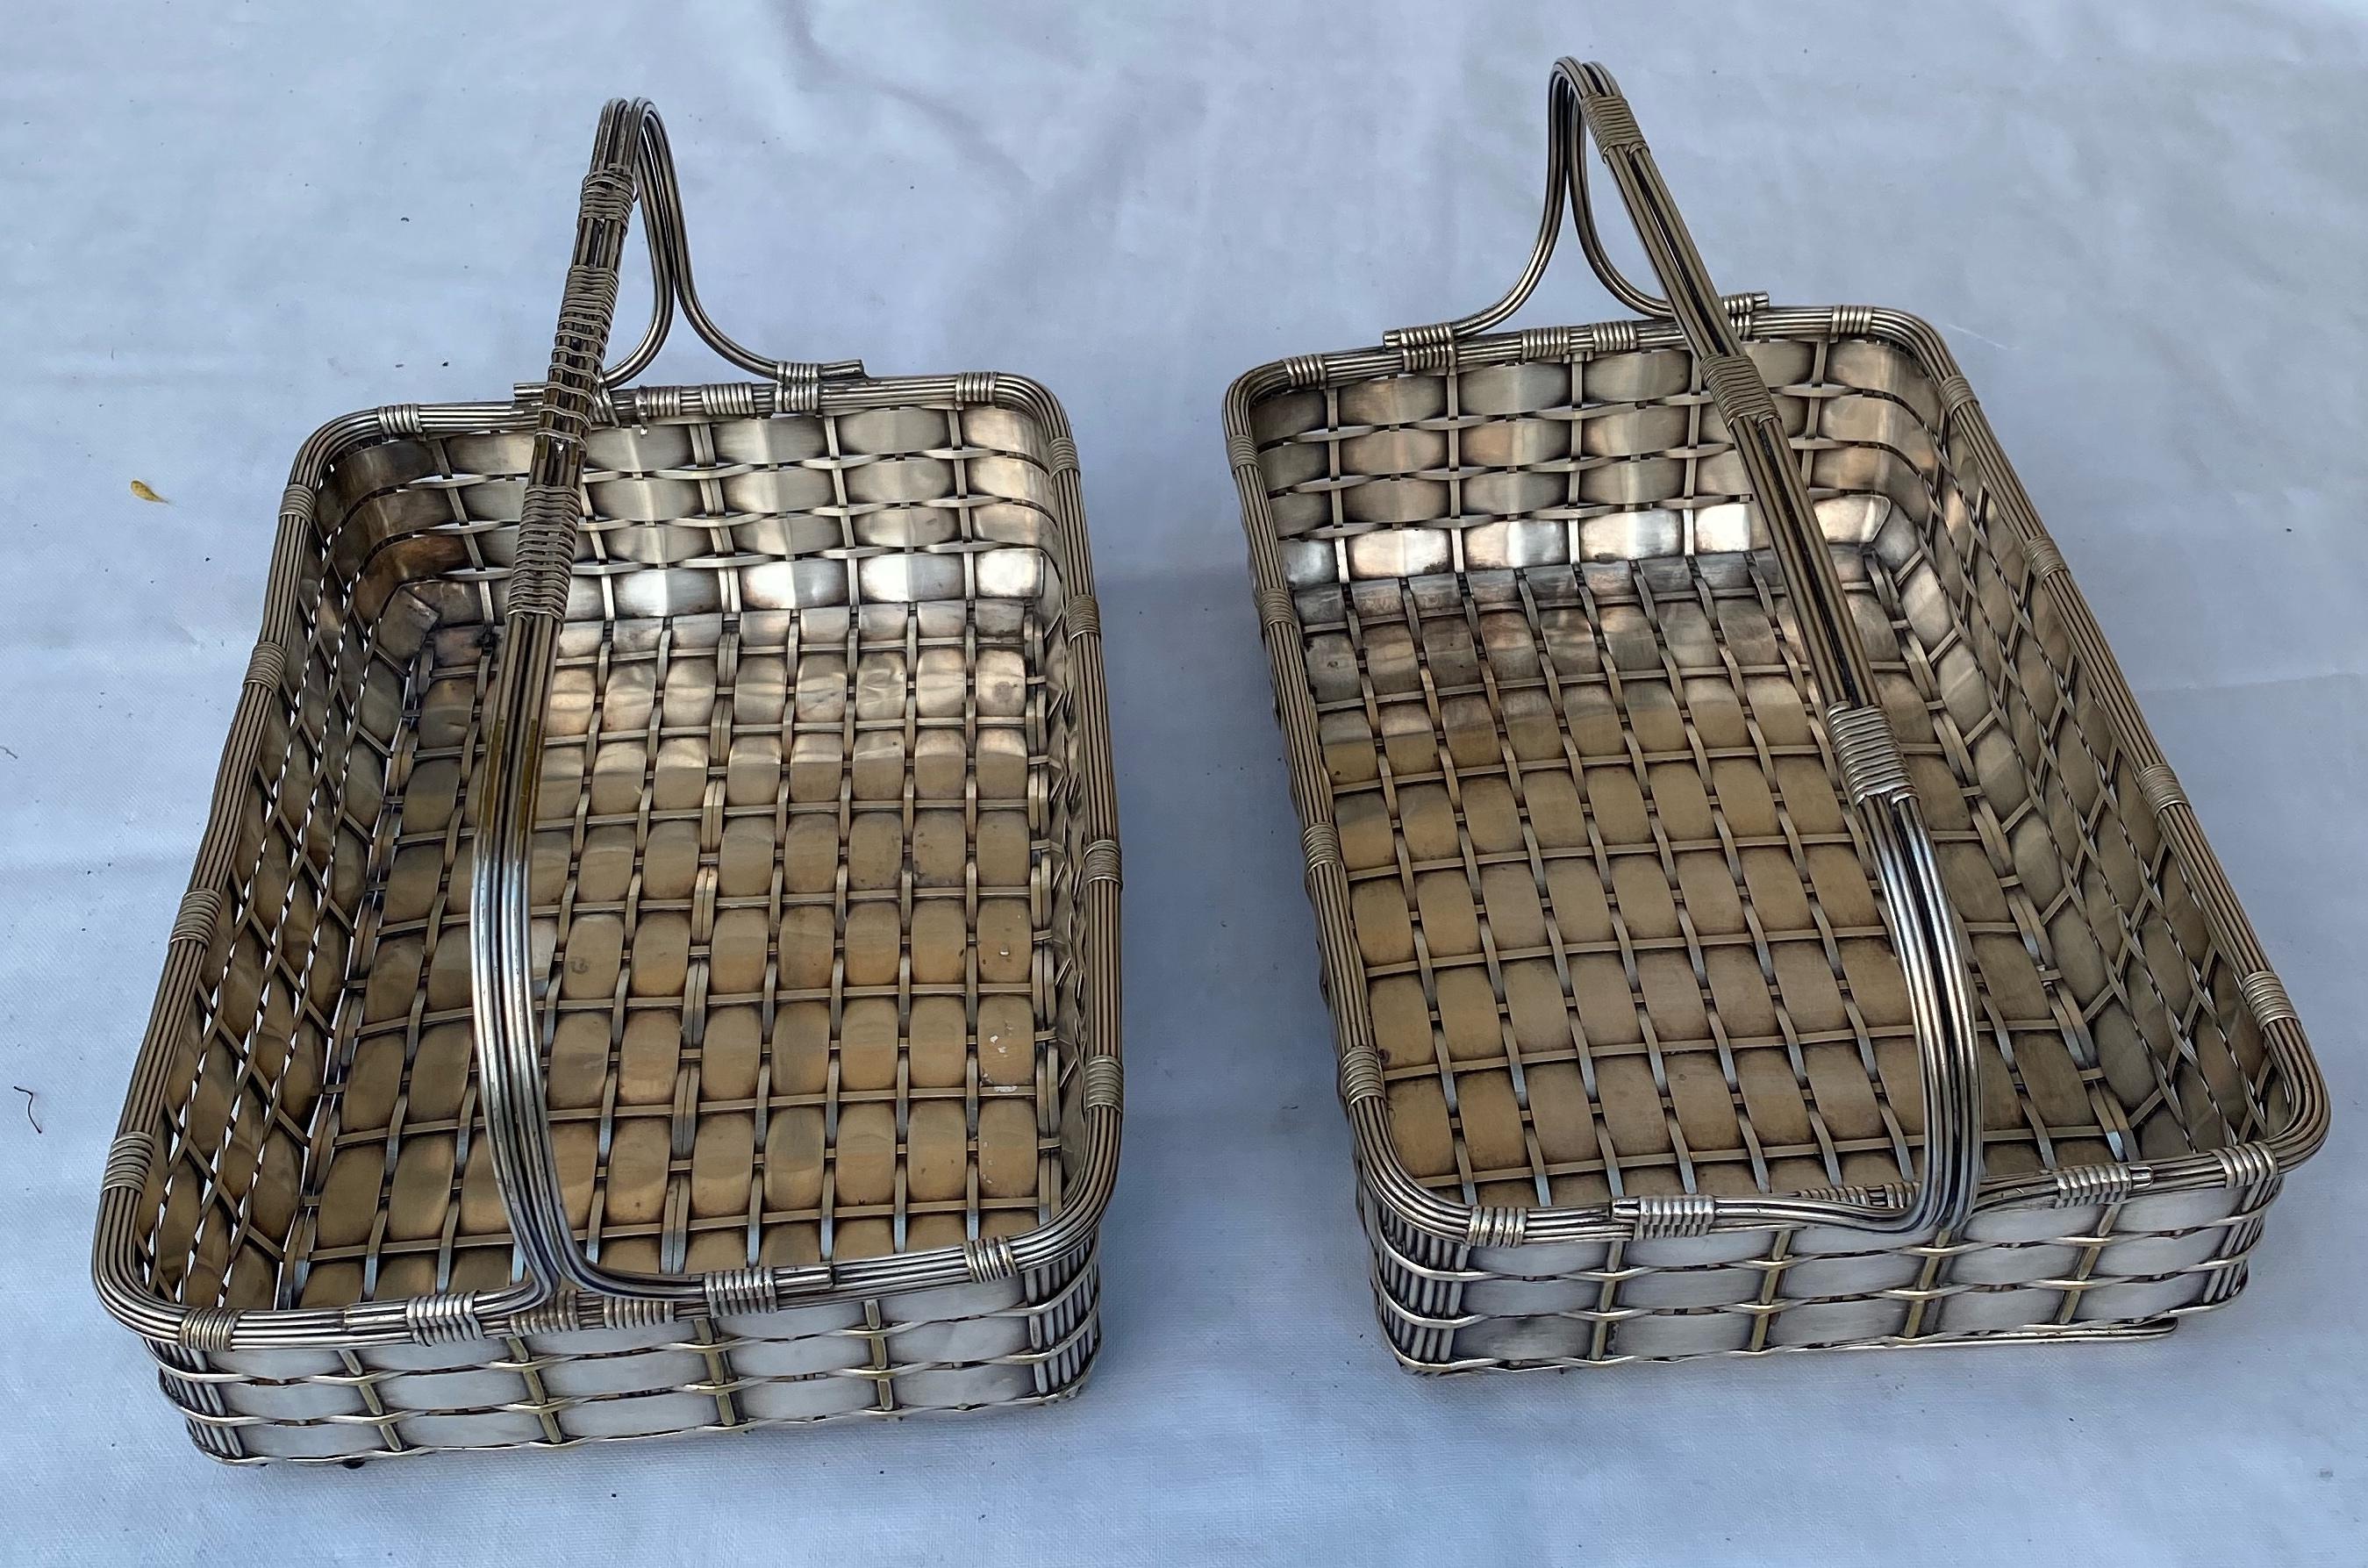 Pair of silver metal baskets in braided metal used for the presentation Goldsmith hallmarks on the back.
Measures: Length: 49cm
Width: 29cm
Height: 27cm
Length excluding handle: 42 cm
Height without handle: 12 cm.